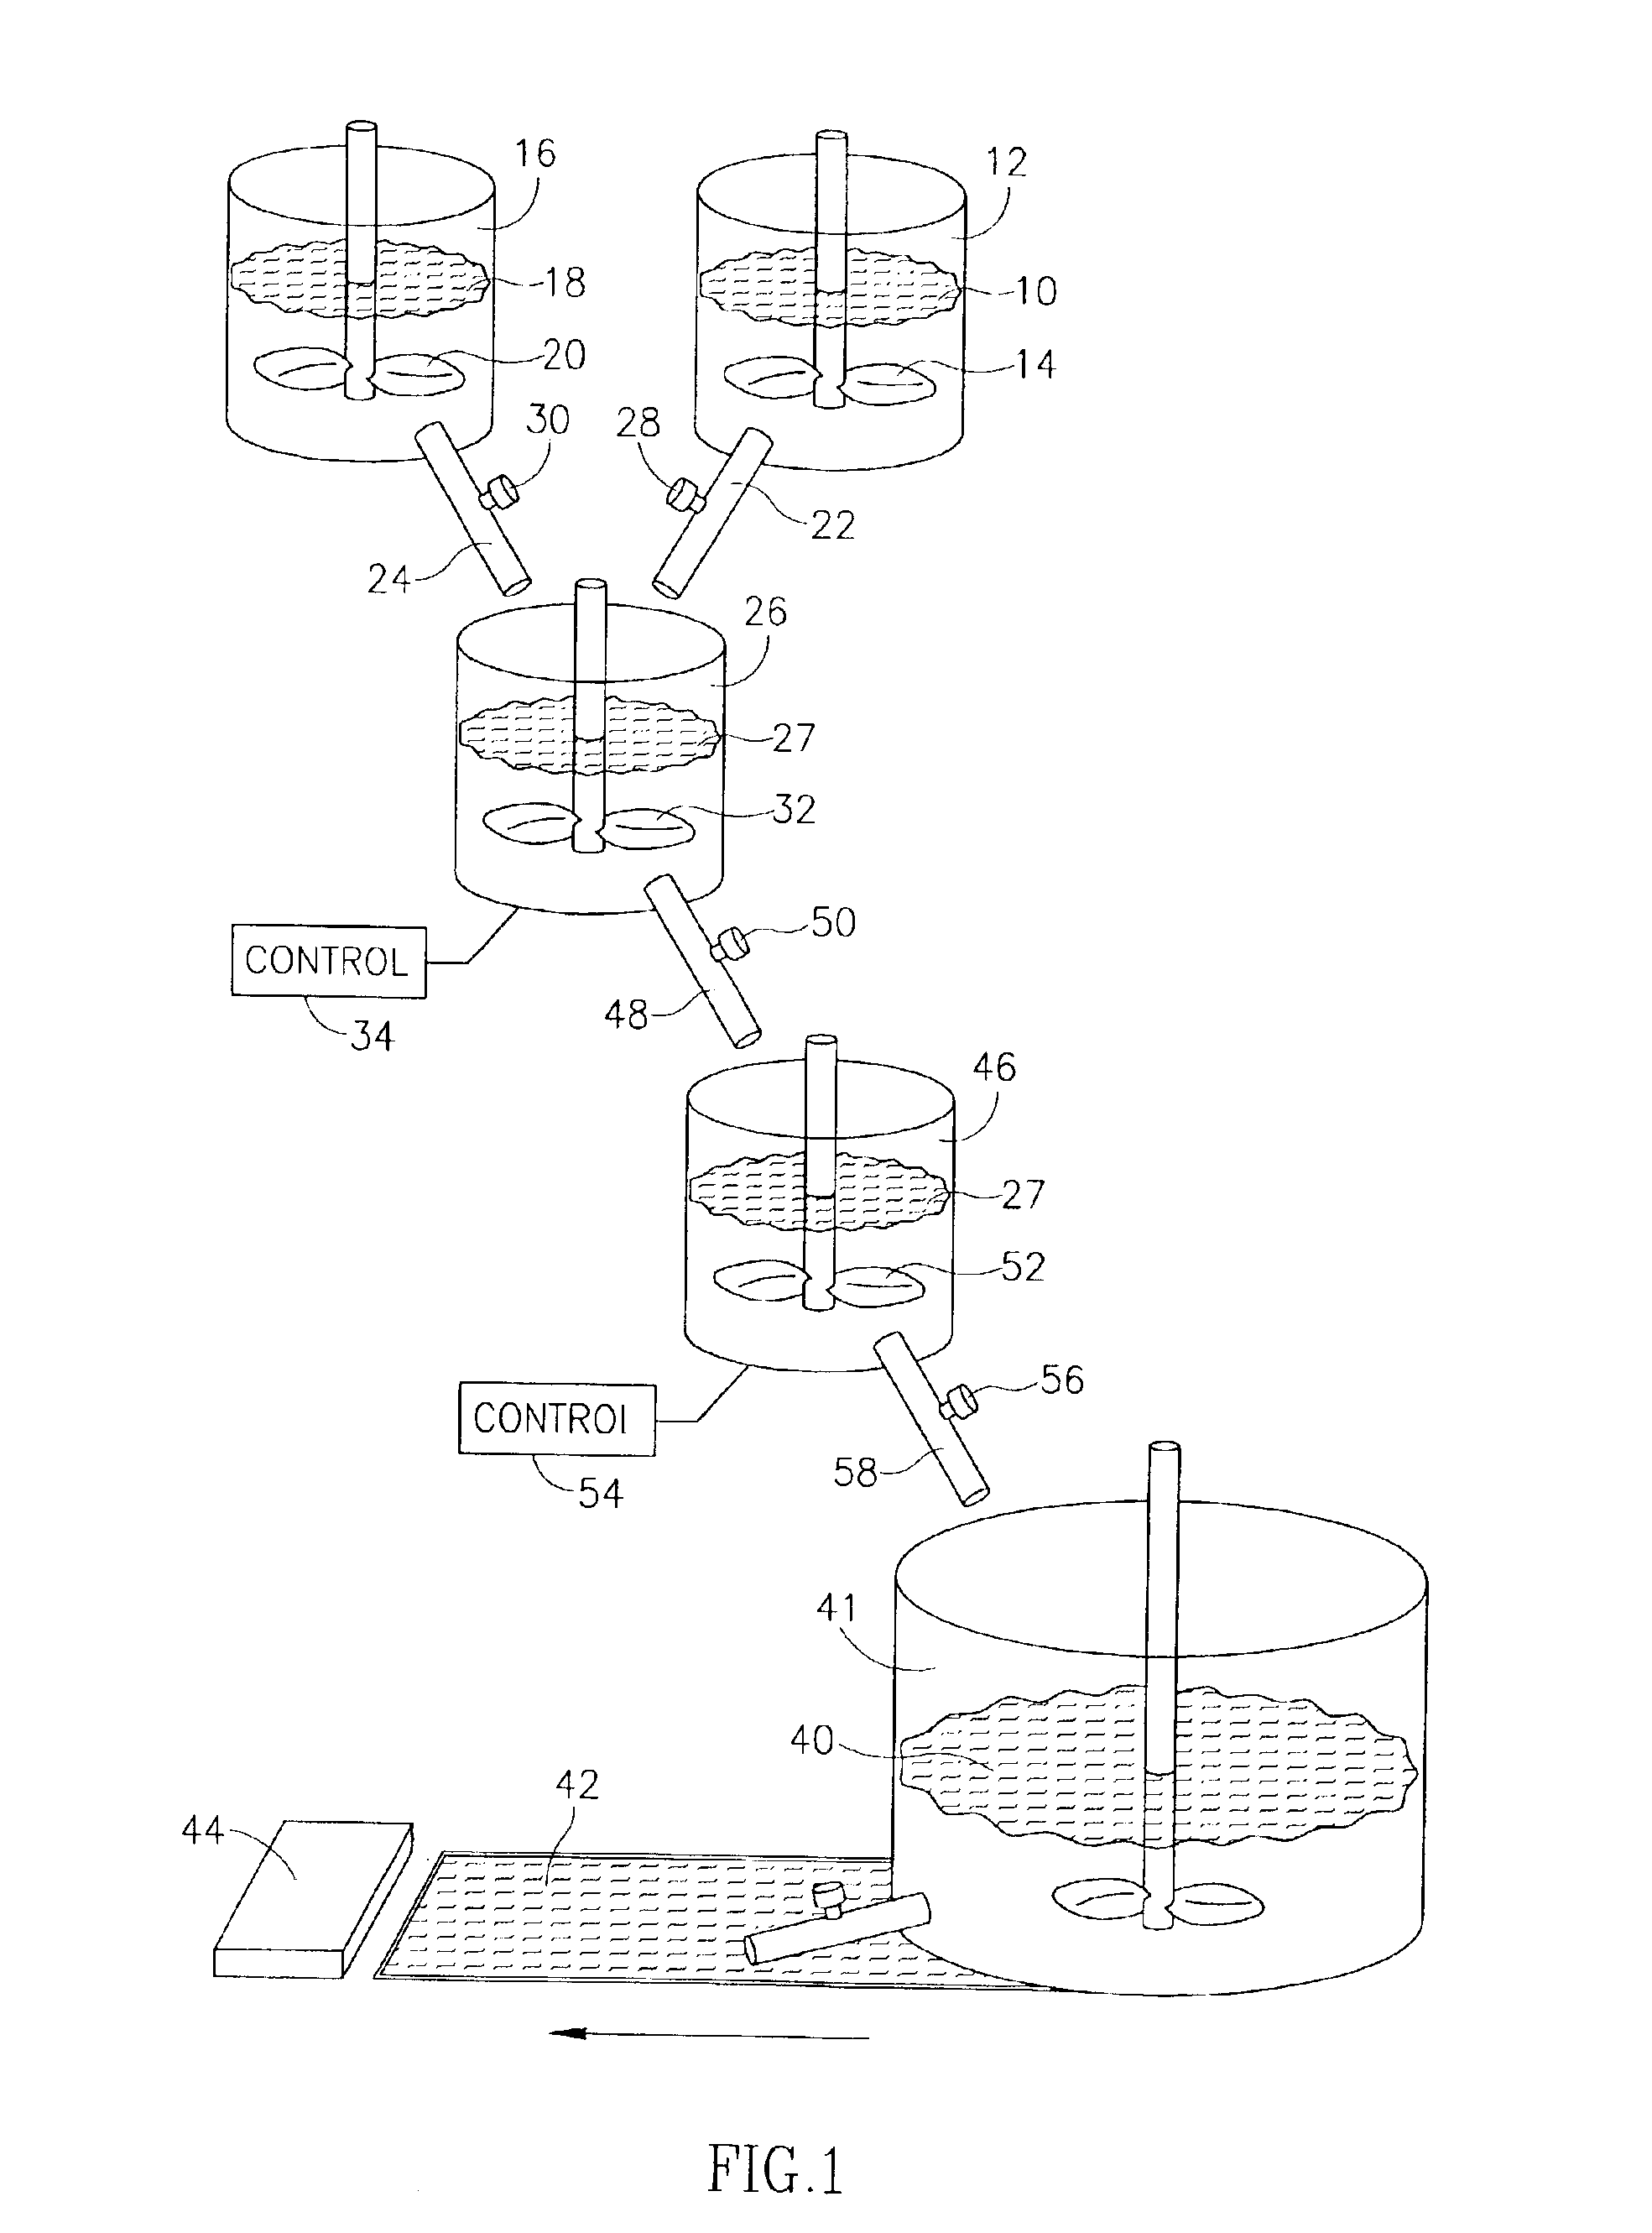 Gypsum product and method therefor